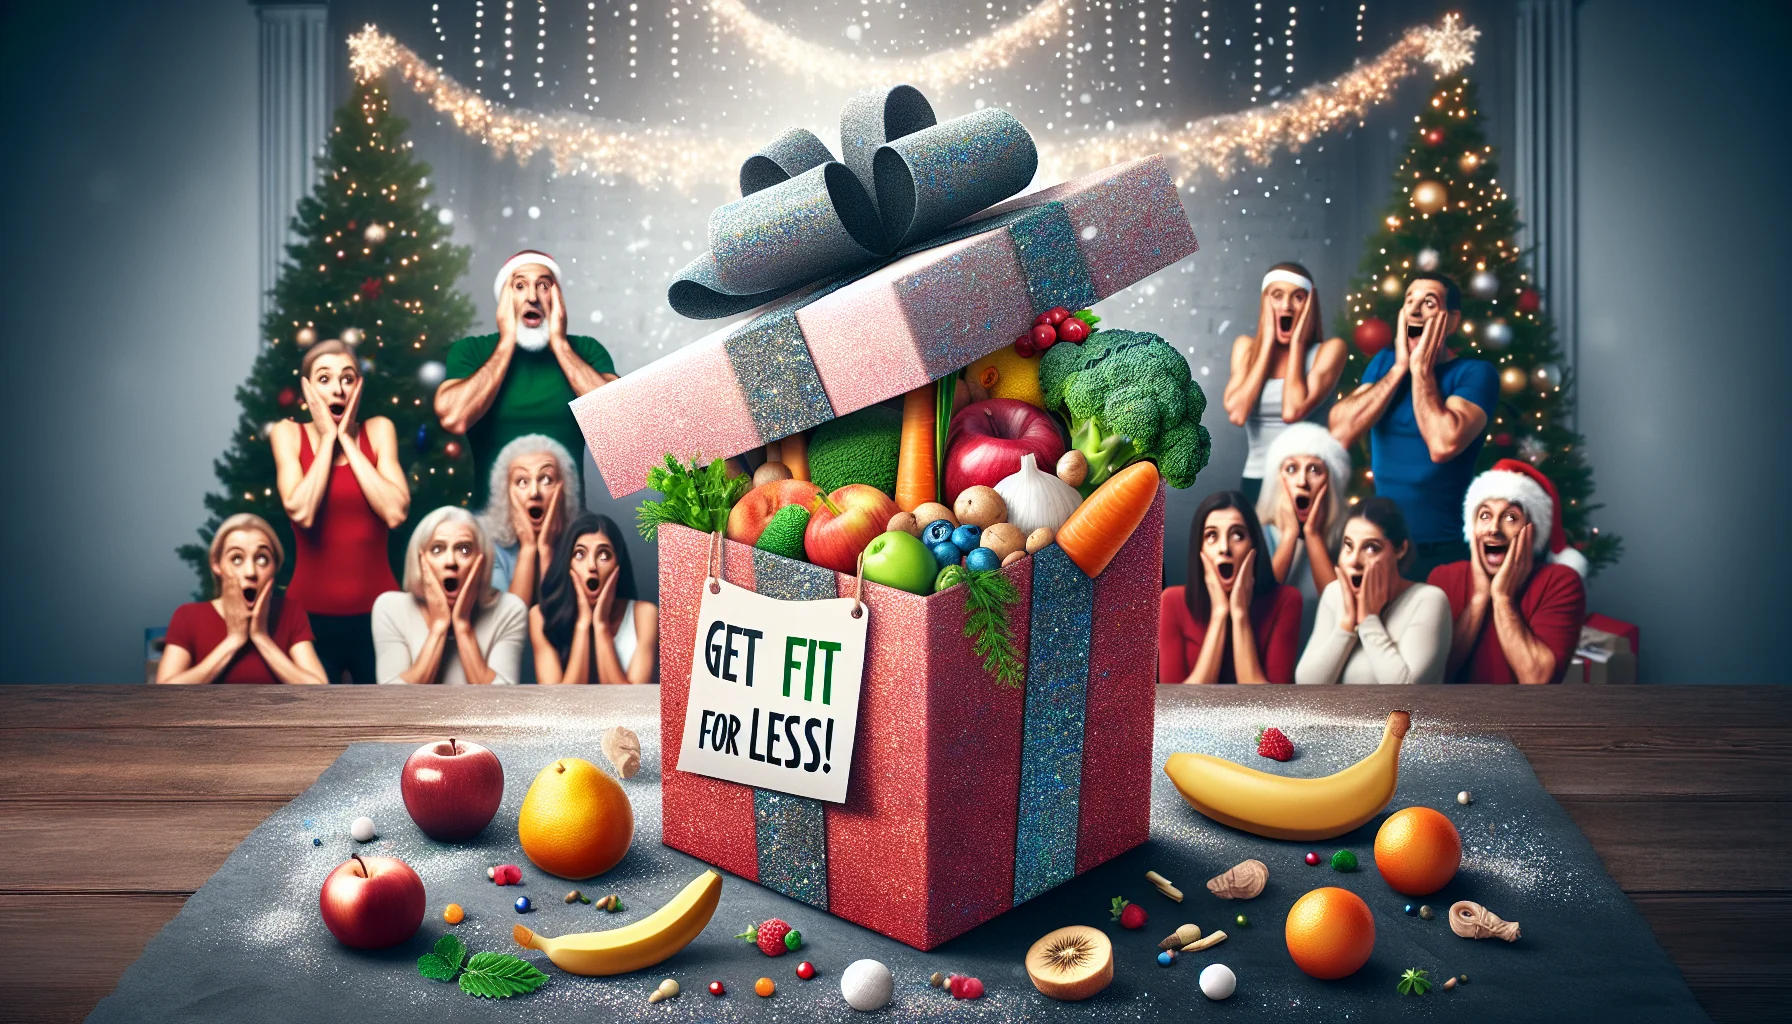 A humorous and realistic scene of an Early Christmas gift idea intended to motivate people to consume more healthily without spending too much. The main focus of the image is a creatively wrapped gift box with a glittery bow. Out of the box, instead of conventional presents, a variety of fresh and colorful fruits and vegetables are spilling out. A catchy tag line 'Get Fit for Less!' is written in fancy holiday themed font at the top of the image. Background is a festive setting filled with sparkling decorations, soft snowflakes, and twinkling Christmas lights. A diverse array of people react with surprised and amusing expressions upon seeing the health-themed gift, representing a humorous twist to the holiday tradition.